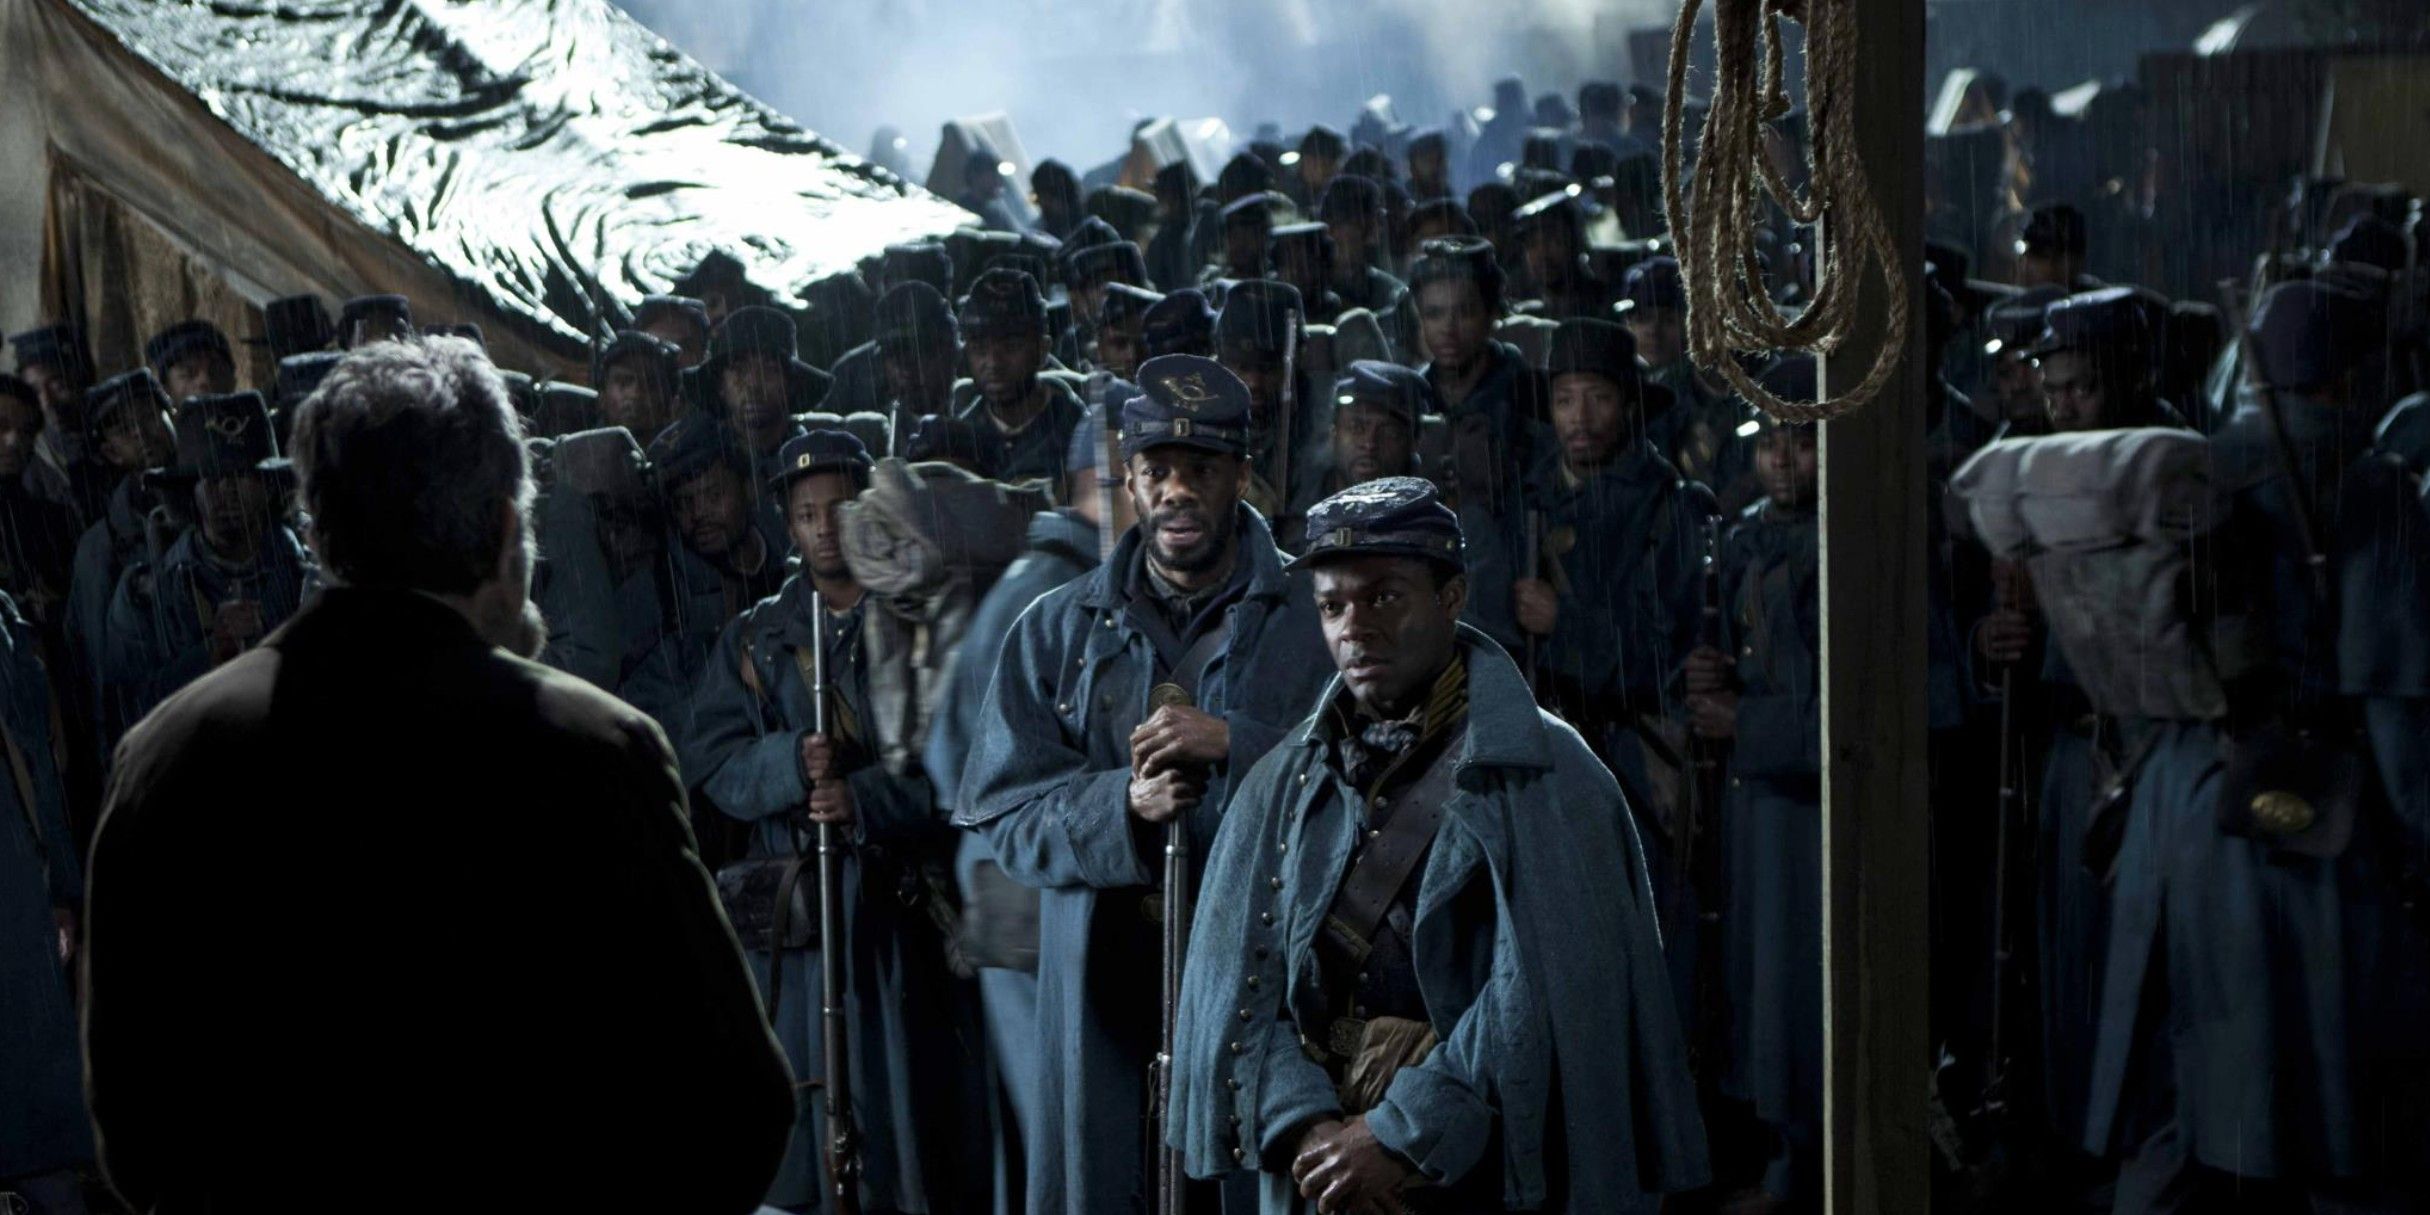 Lincoln speaking to African Americans in the movie